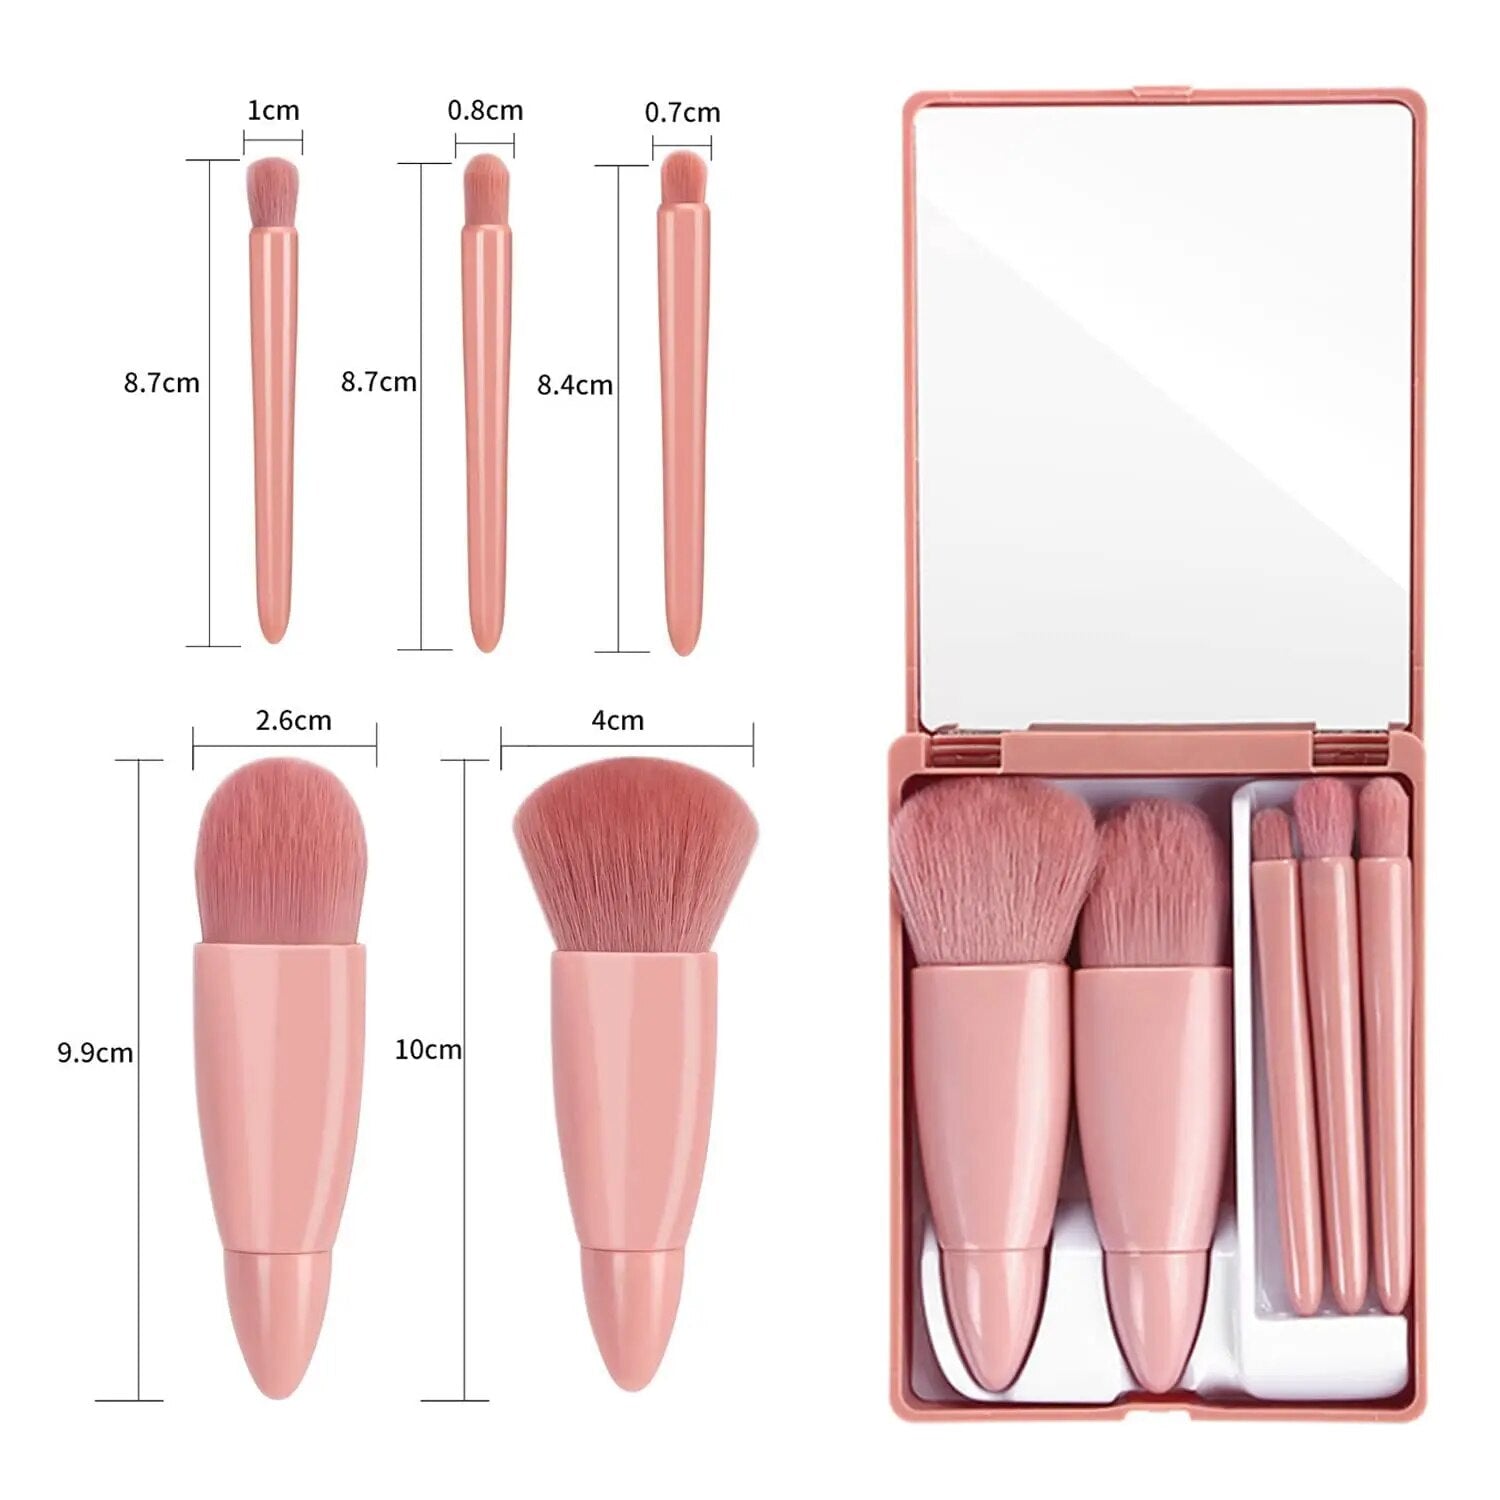 Mibrush™ 5 in 1 Makeup Brushes Set with Mirror